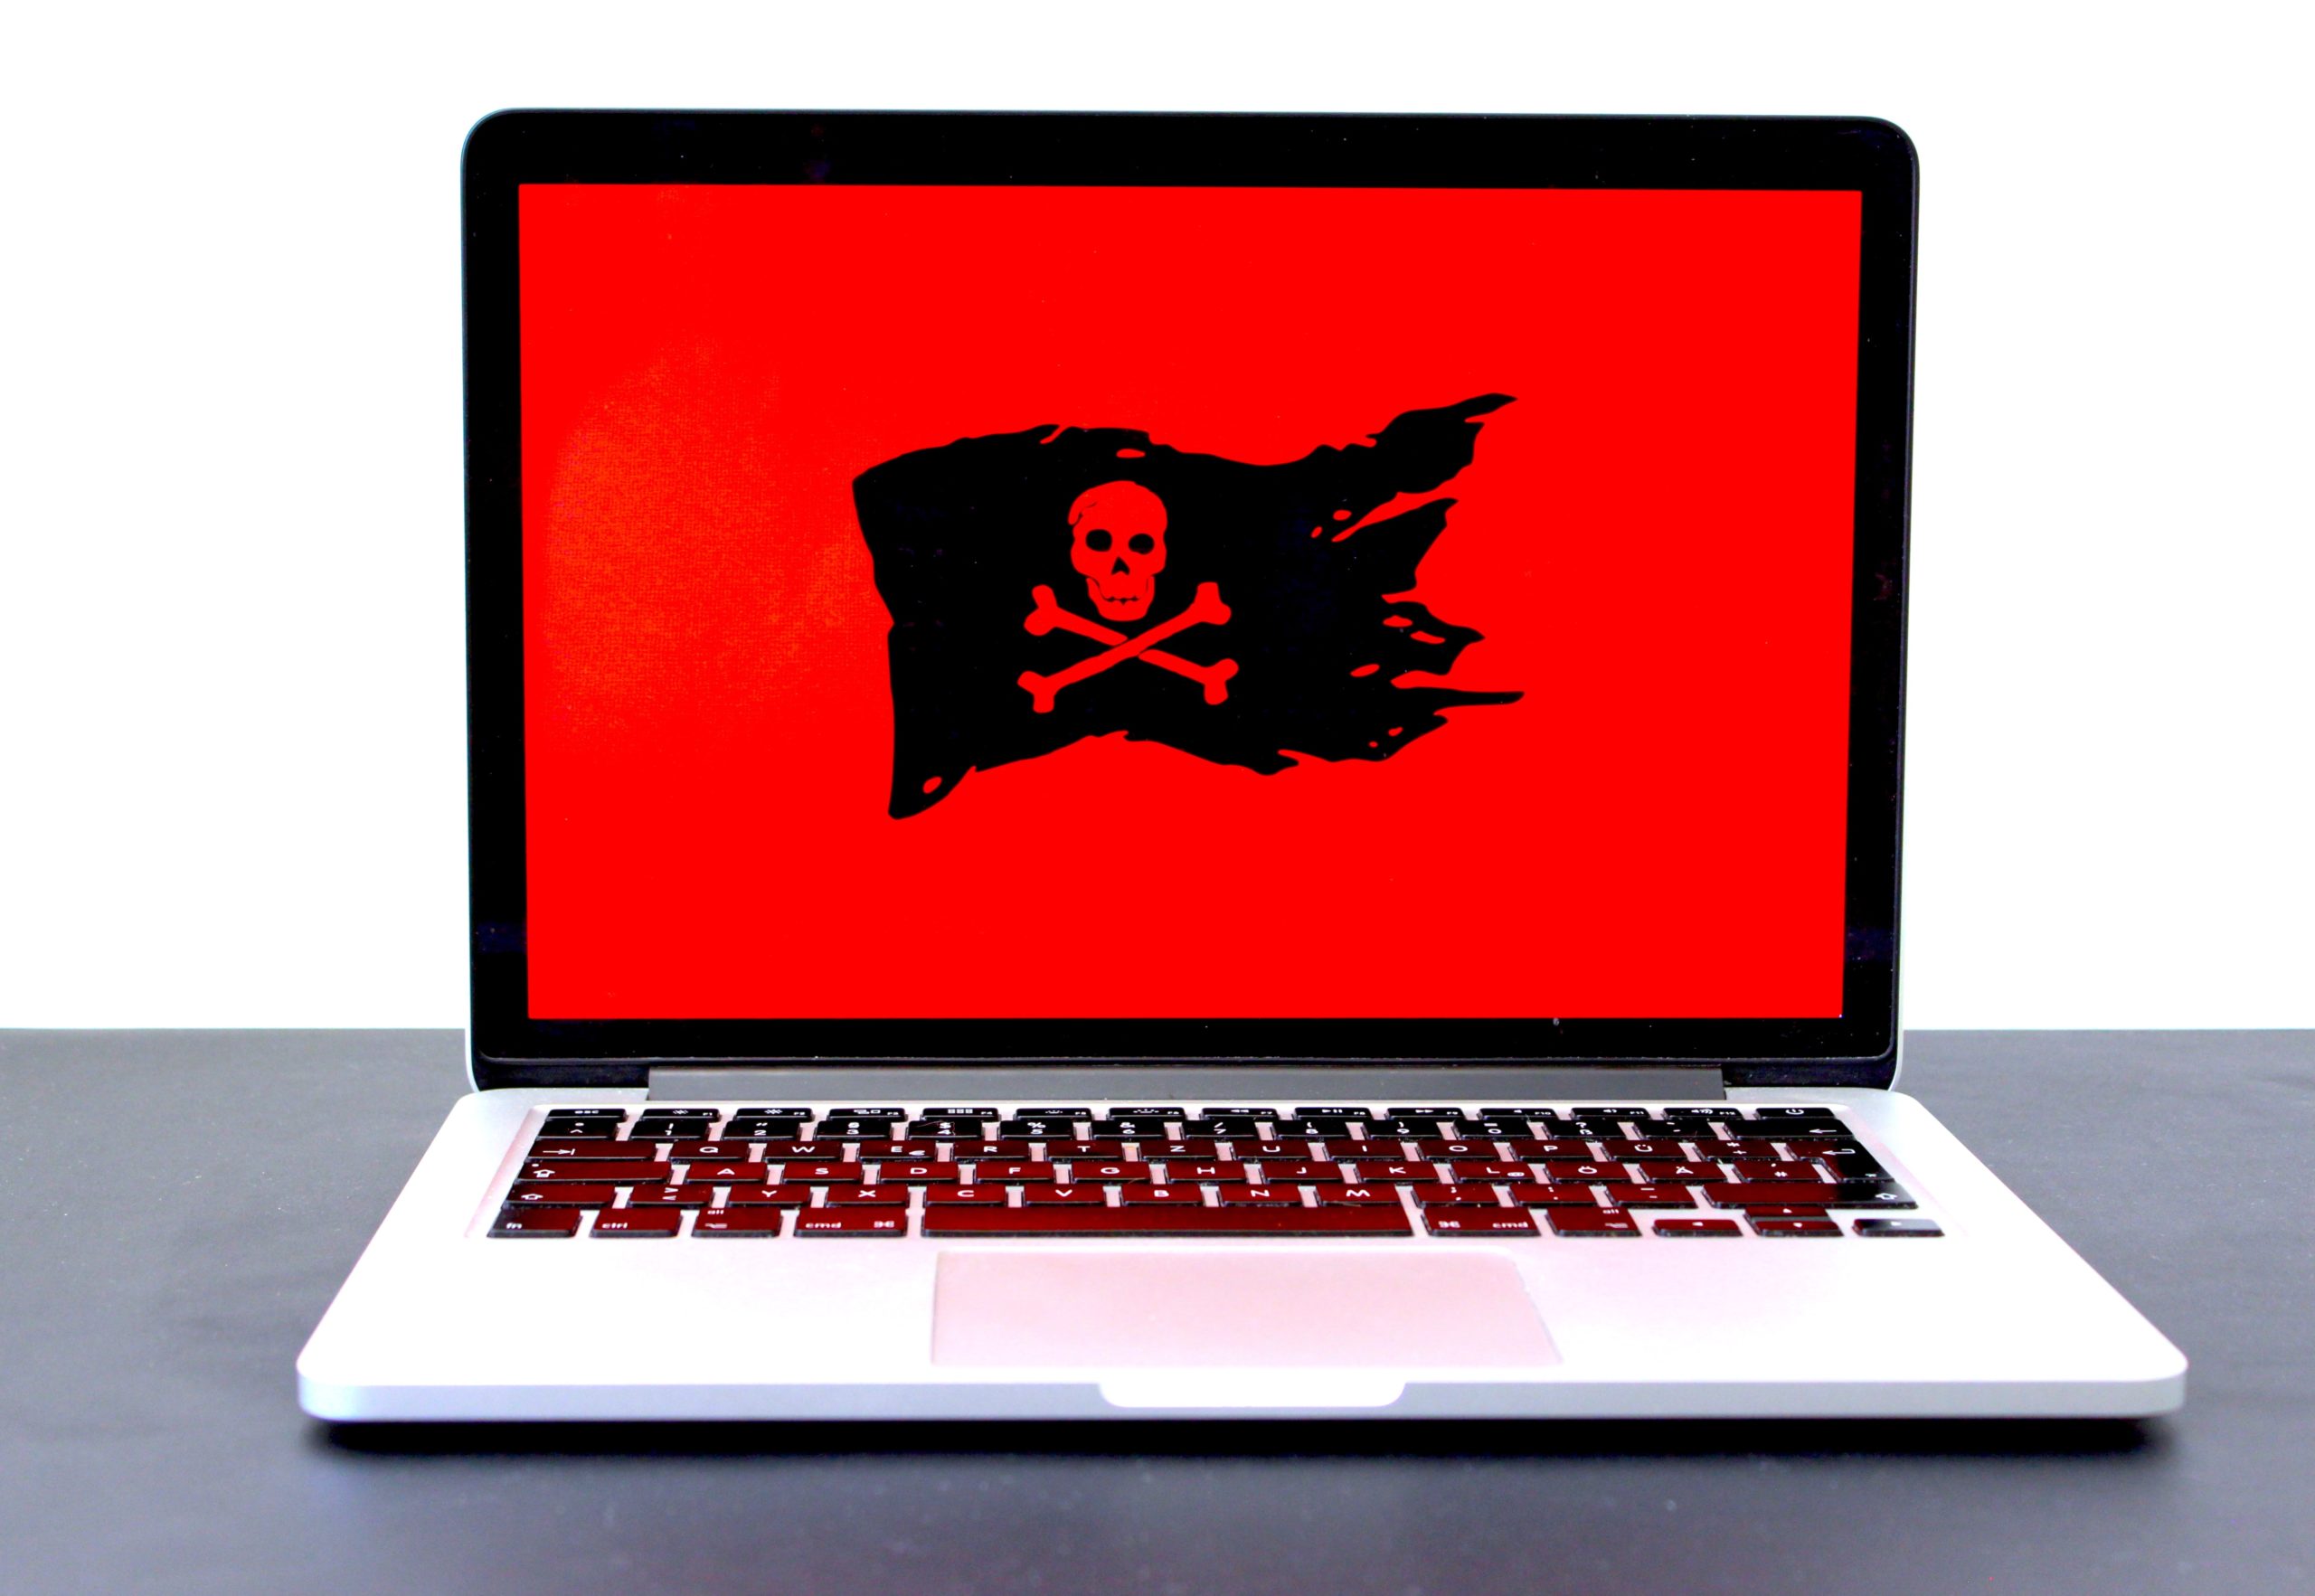 ReVil Ransomware Threatens to Squeeze Their Victims with Public Exposure of Data